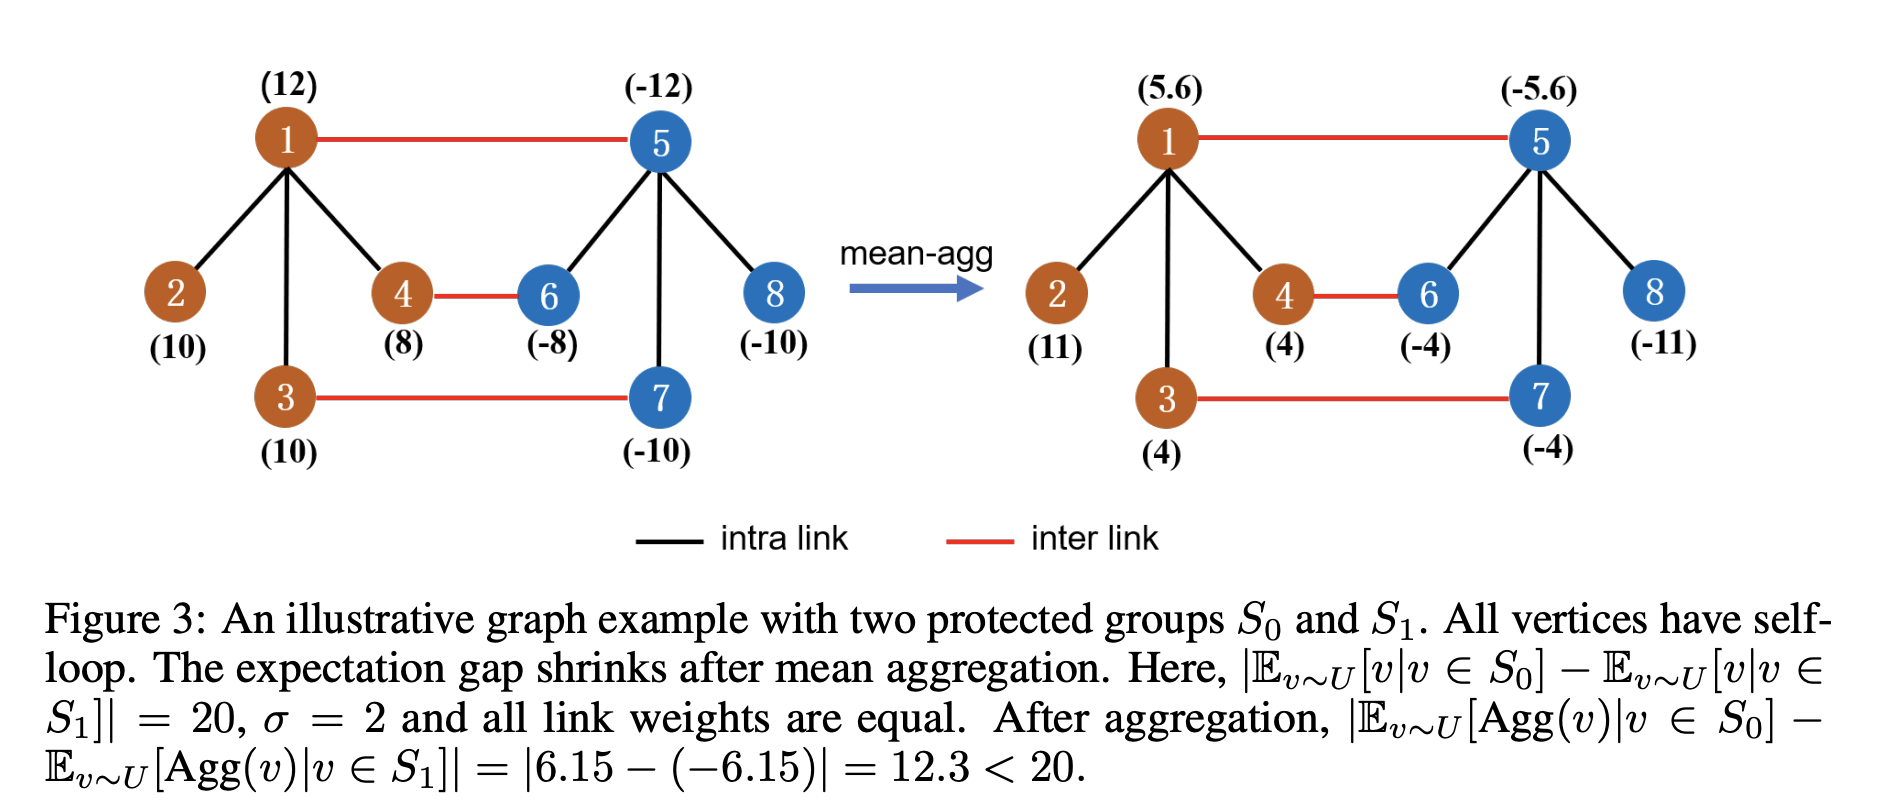 Figure 3 from the paper's appendix. The figure contains two graphs: the left graph is from prior to mean-aggregation and the right graph is post mean-aggregation. The left graph contains 8 nodes: nodes 1 to 4 are orange and belong to the first sensitive group and nodes 5 to 8 are blue and belong to the second sensitive group. Each node has only one feature. Nodes 1, 2, 3, 4 have feature values 12, 10, 10, 8, respectively. Nodes 5, 6, 7, 8 have feature values -12, -8, -10, -10, respectively. The left graph contains the undirected edges: (1, 2), (1, 3), (1, 4), (1, 5), (3, 7), (4, 6), (5, 6), (5, 7), (5, 8). All nodes also have a self-loop. All edge weights are equal. Inter-links are depicted in red and intra-links are depicted in black. The right graph has the same structure and colors but Nodes 1 to 8 have feature values 5.6, 11, 4, 4, -5.6, -4, -4, -11, respectively. The representation disparity between the sensitive groups is initially 20 and sigma is 2, but after mean-aggregation, the representation disparity shrinks to 12.3.